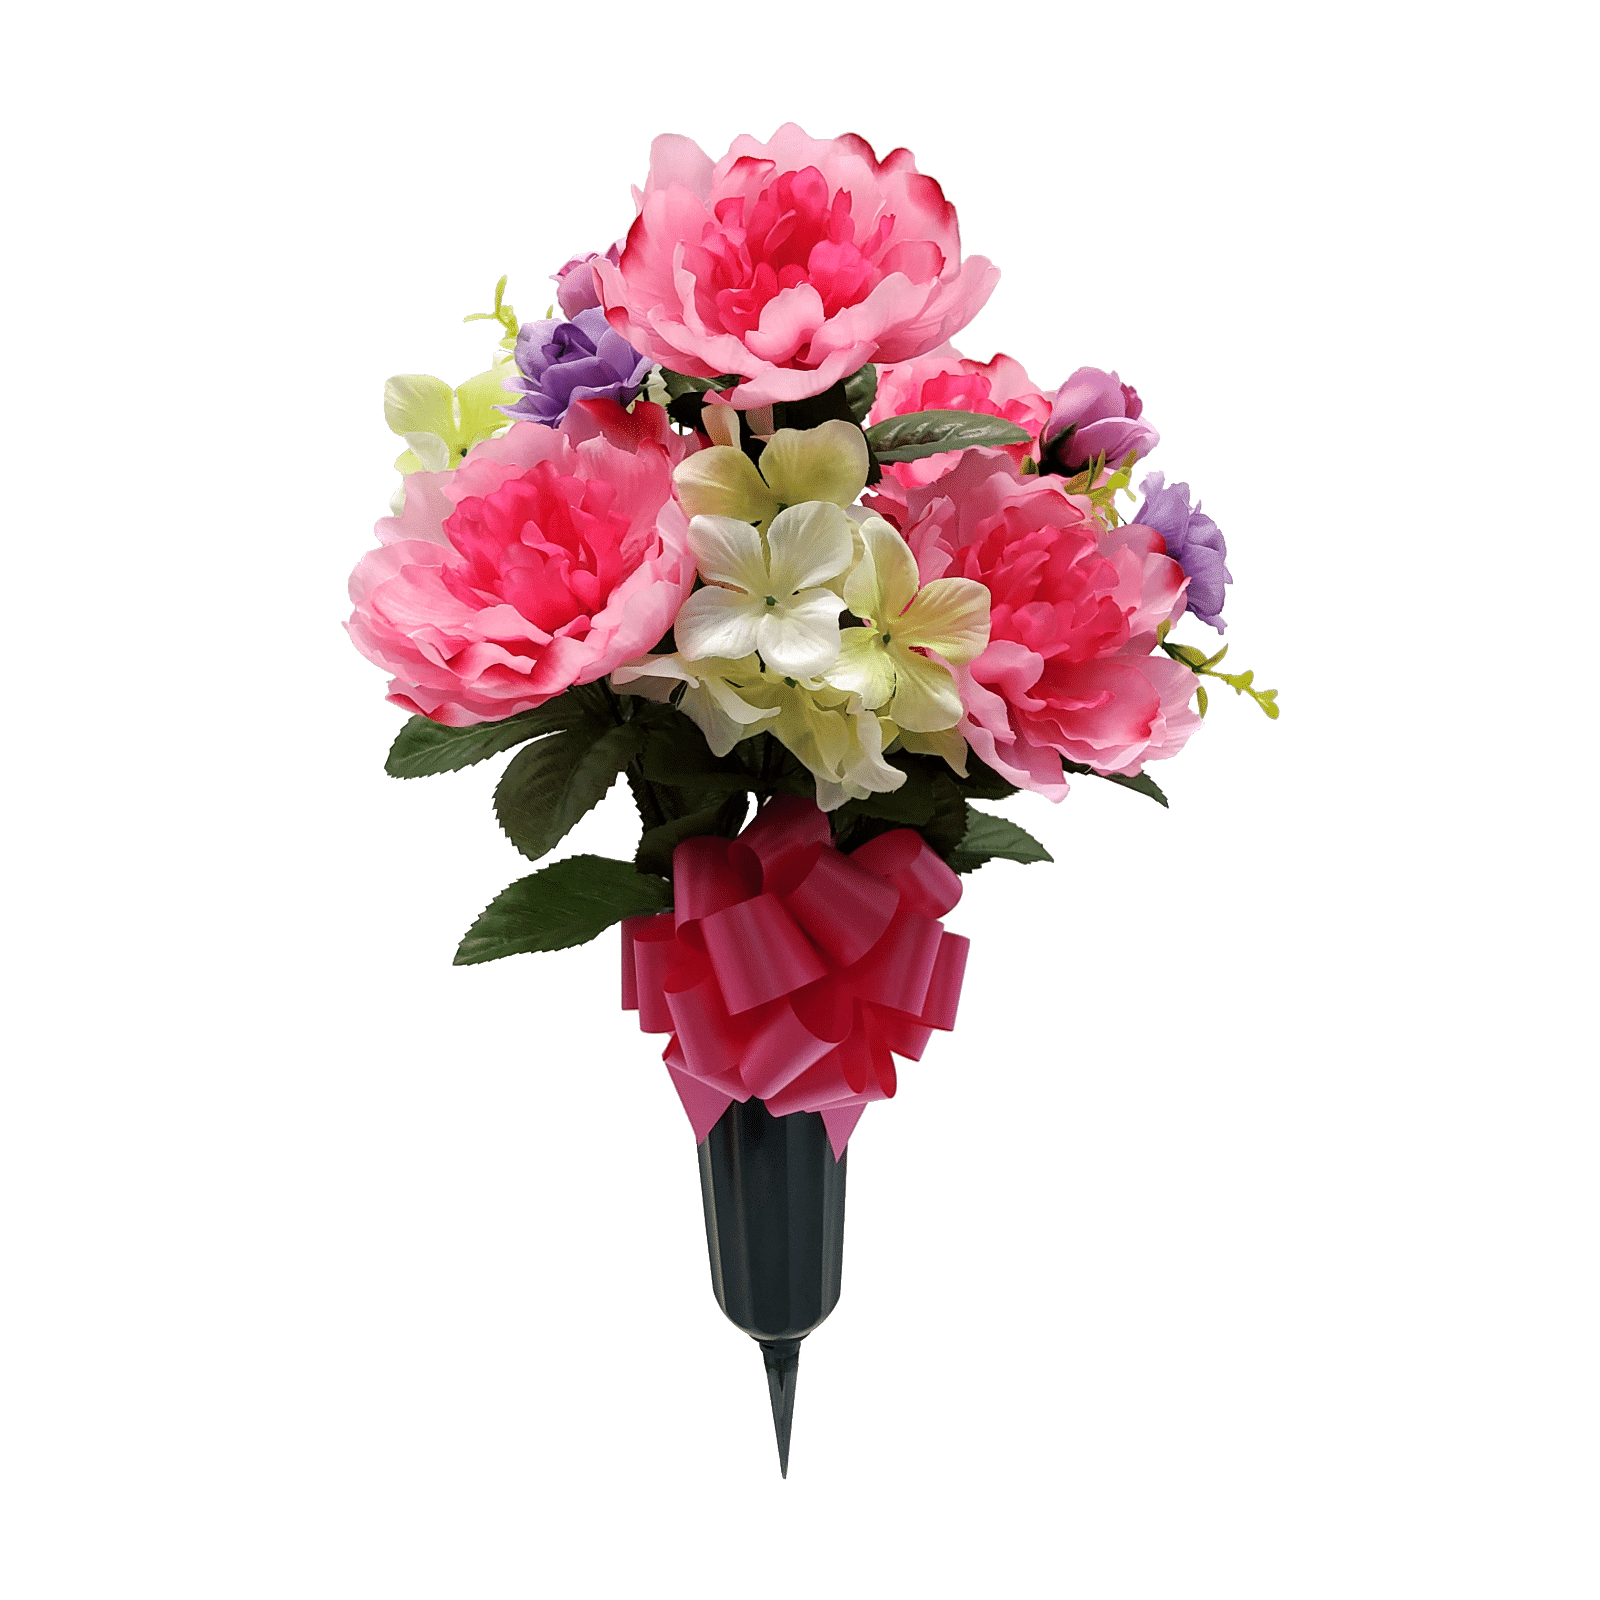 Mainstays 20 Artificial Flower, Peony and Hydrangea, Cemetery Vase, Pink Color.